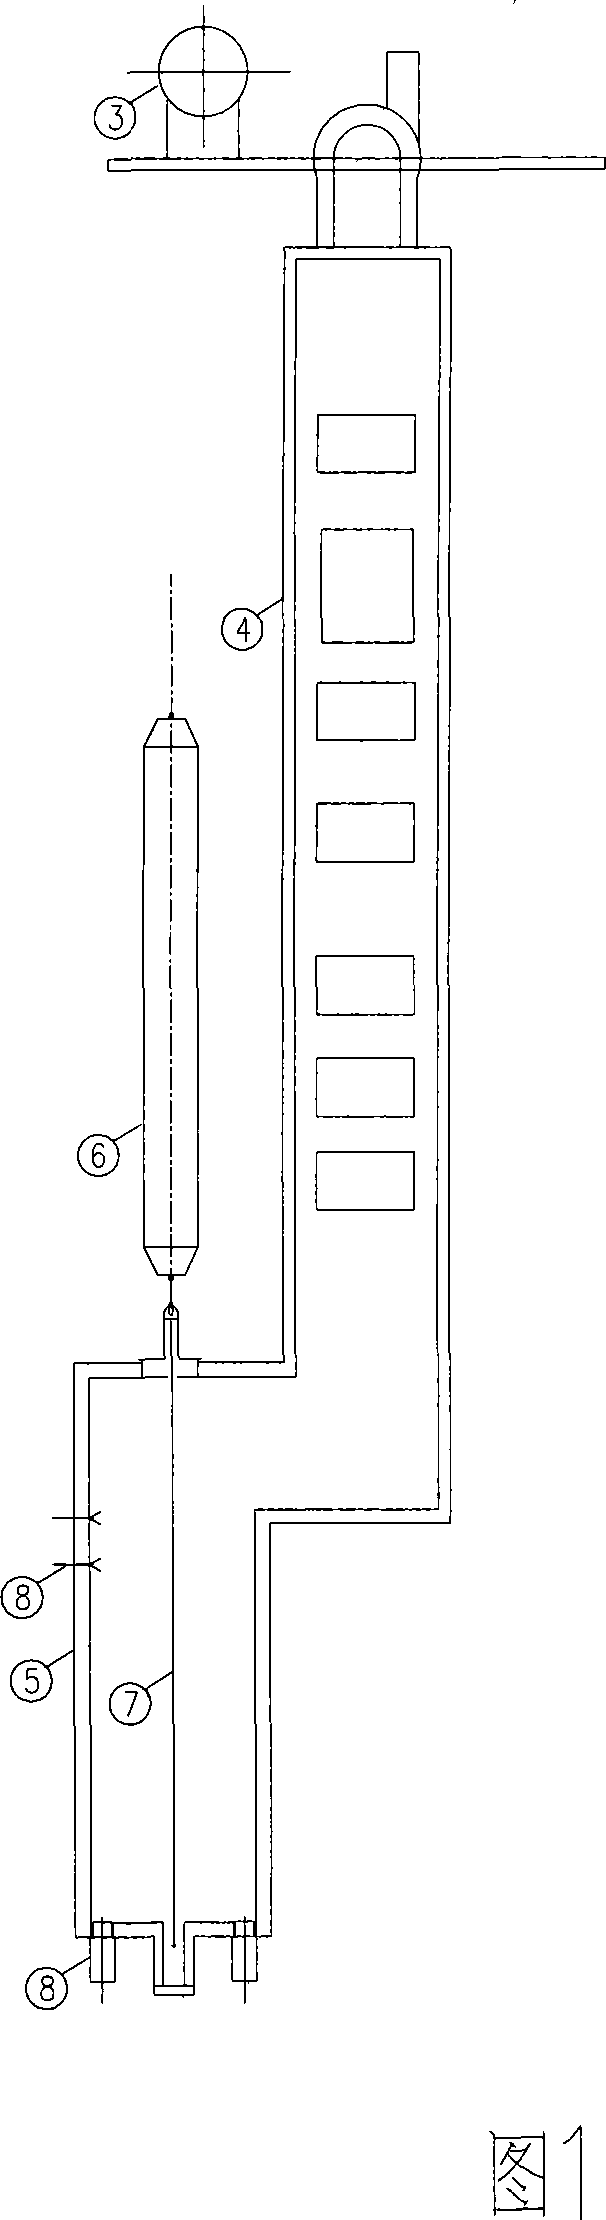 Cracking furnace with radiation furnace tubes configured in U-shaped structure